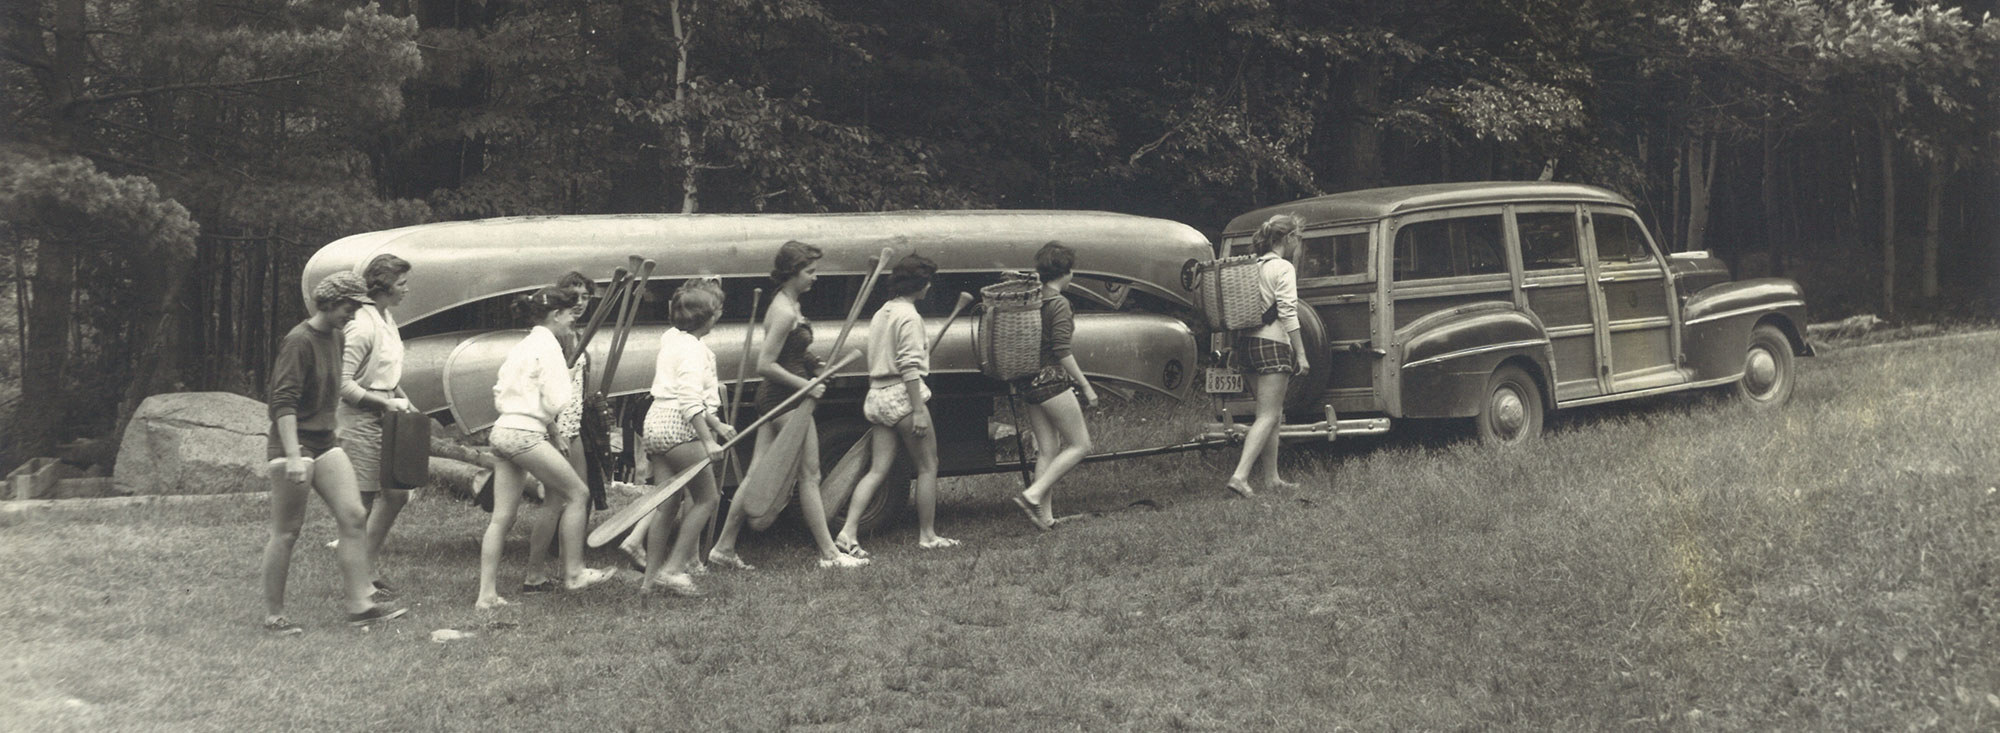 Old photo of campers walking away with paddles from station wagon and trailer full of canoes